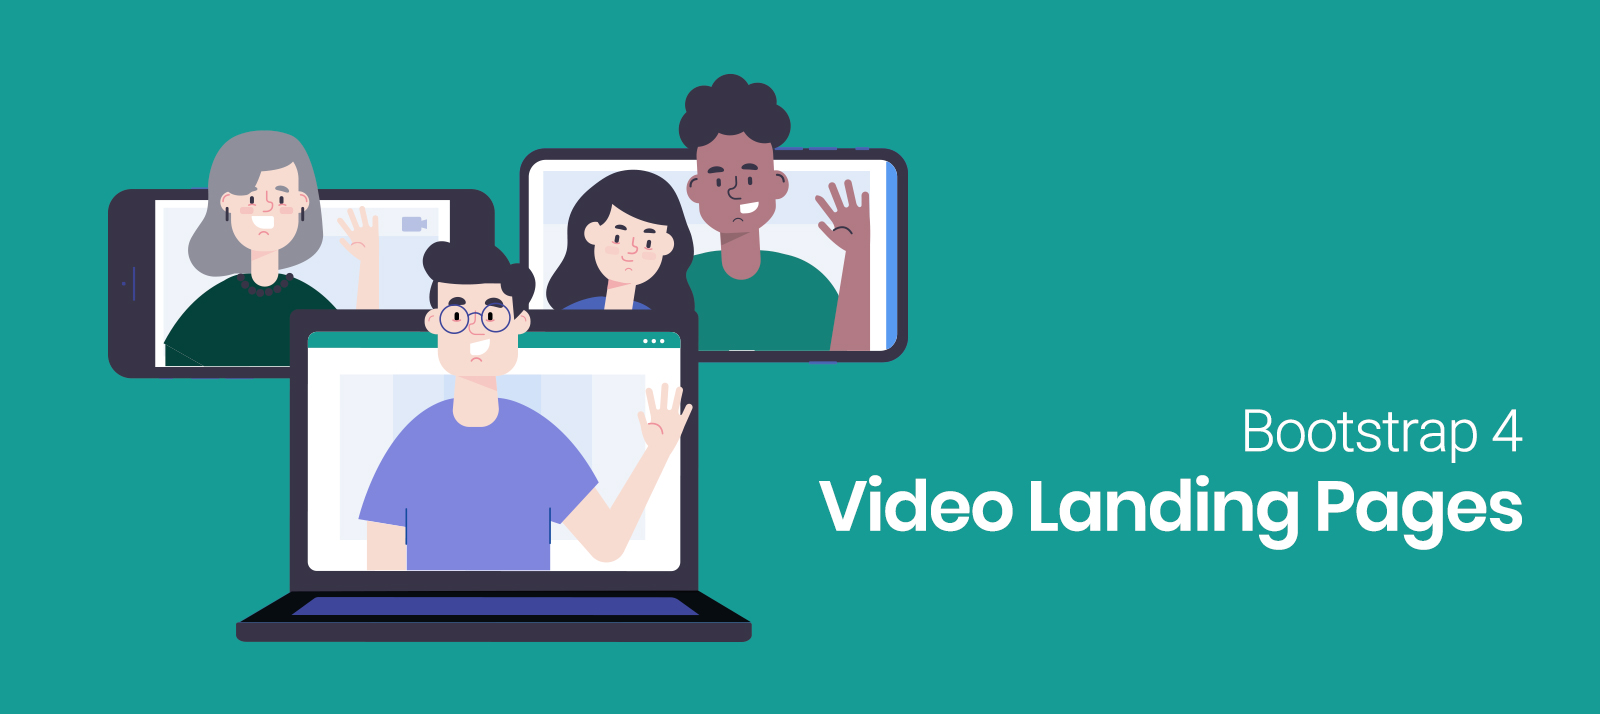  Bootstrap 4 Video Landing Pages Sure to Impress Users in 2020 